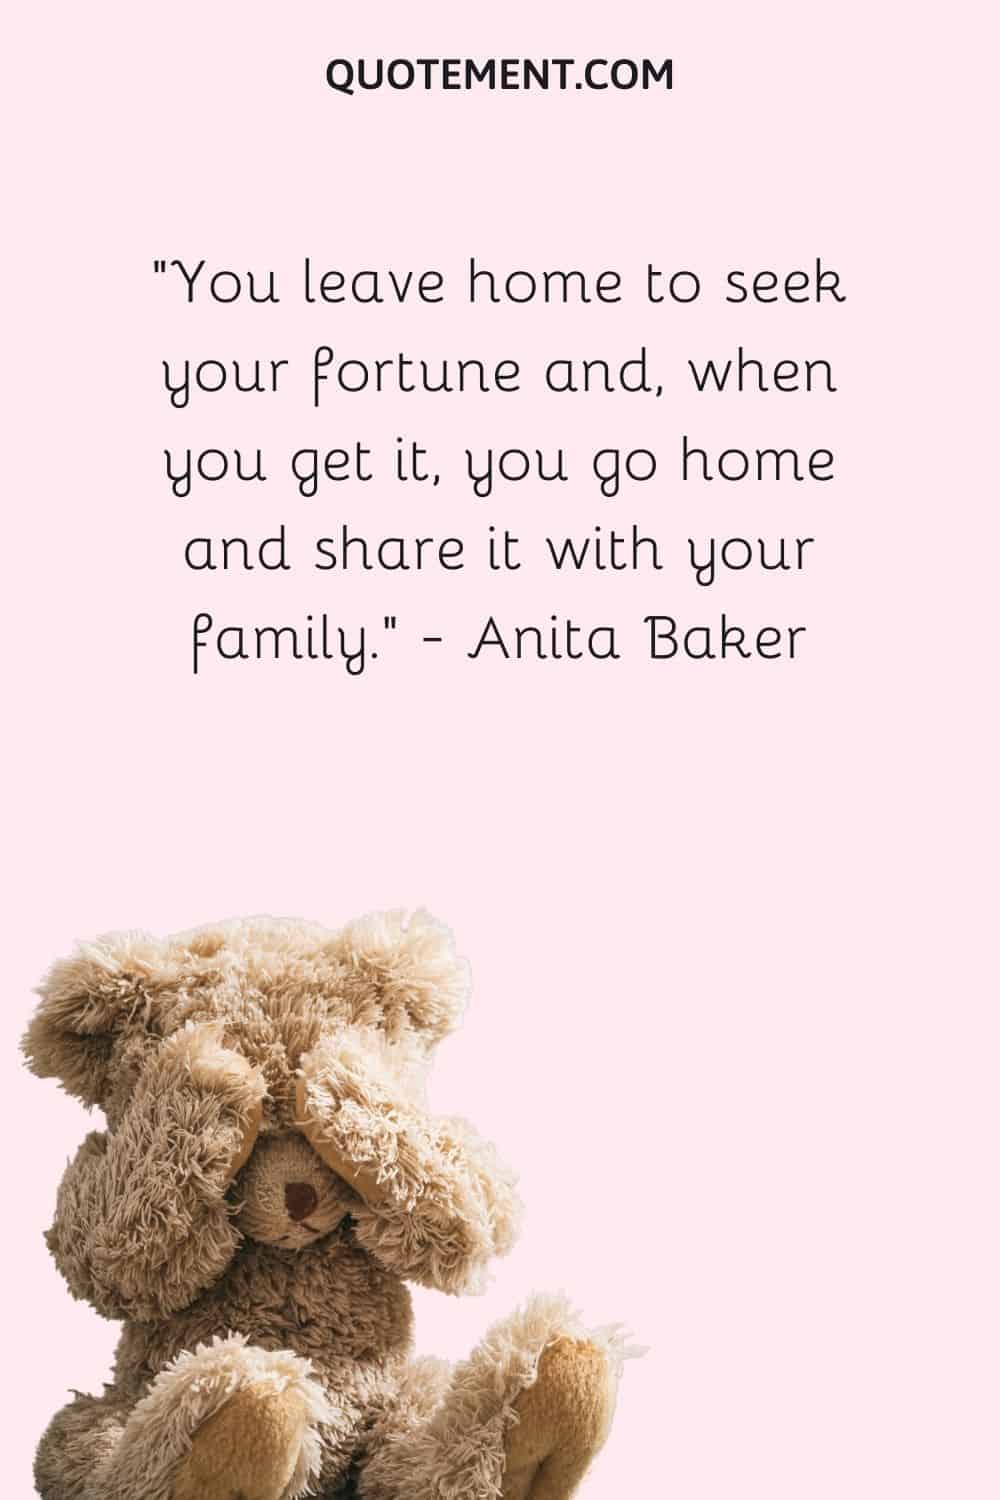 You leave home to seek your fortune and, when you get it, you go home and share it with your family. — Anita Baker